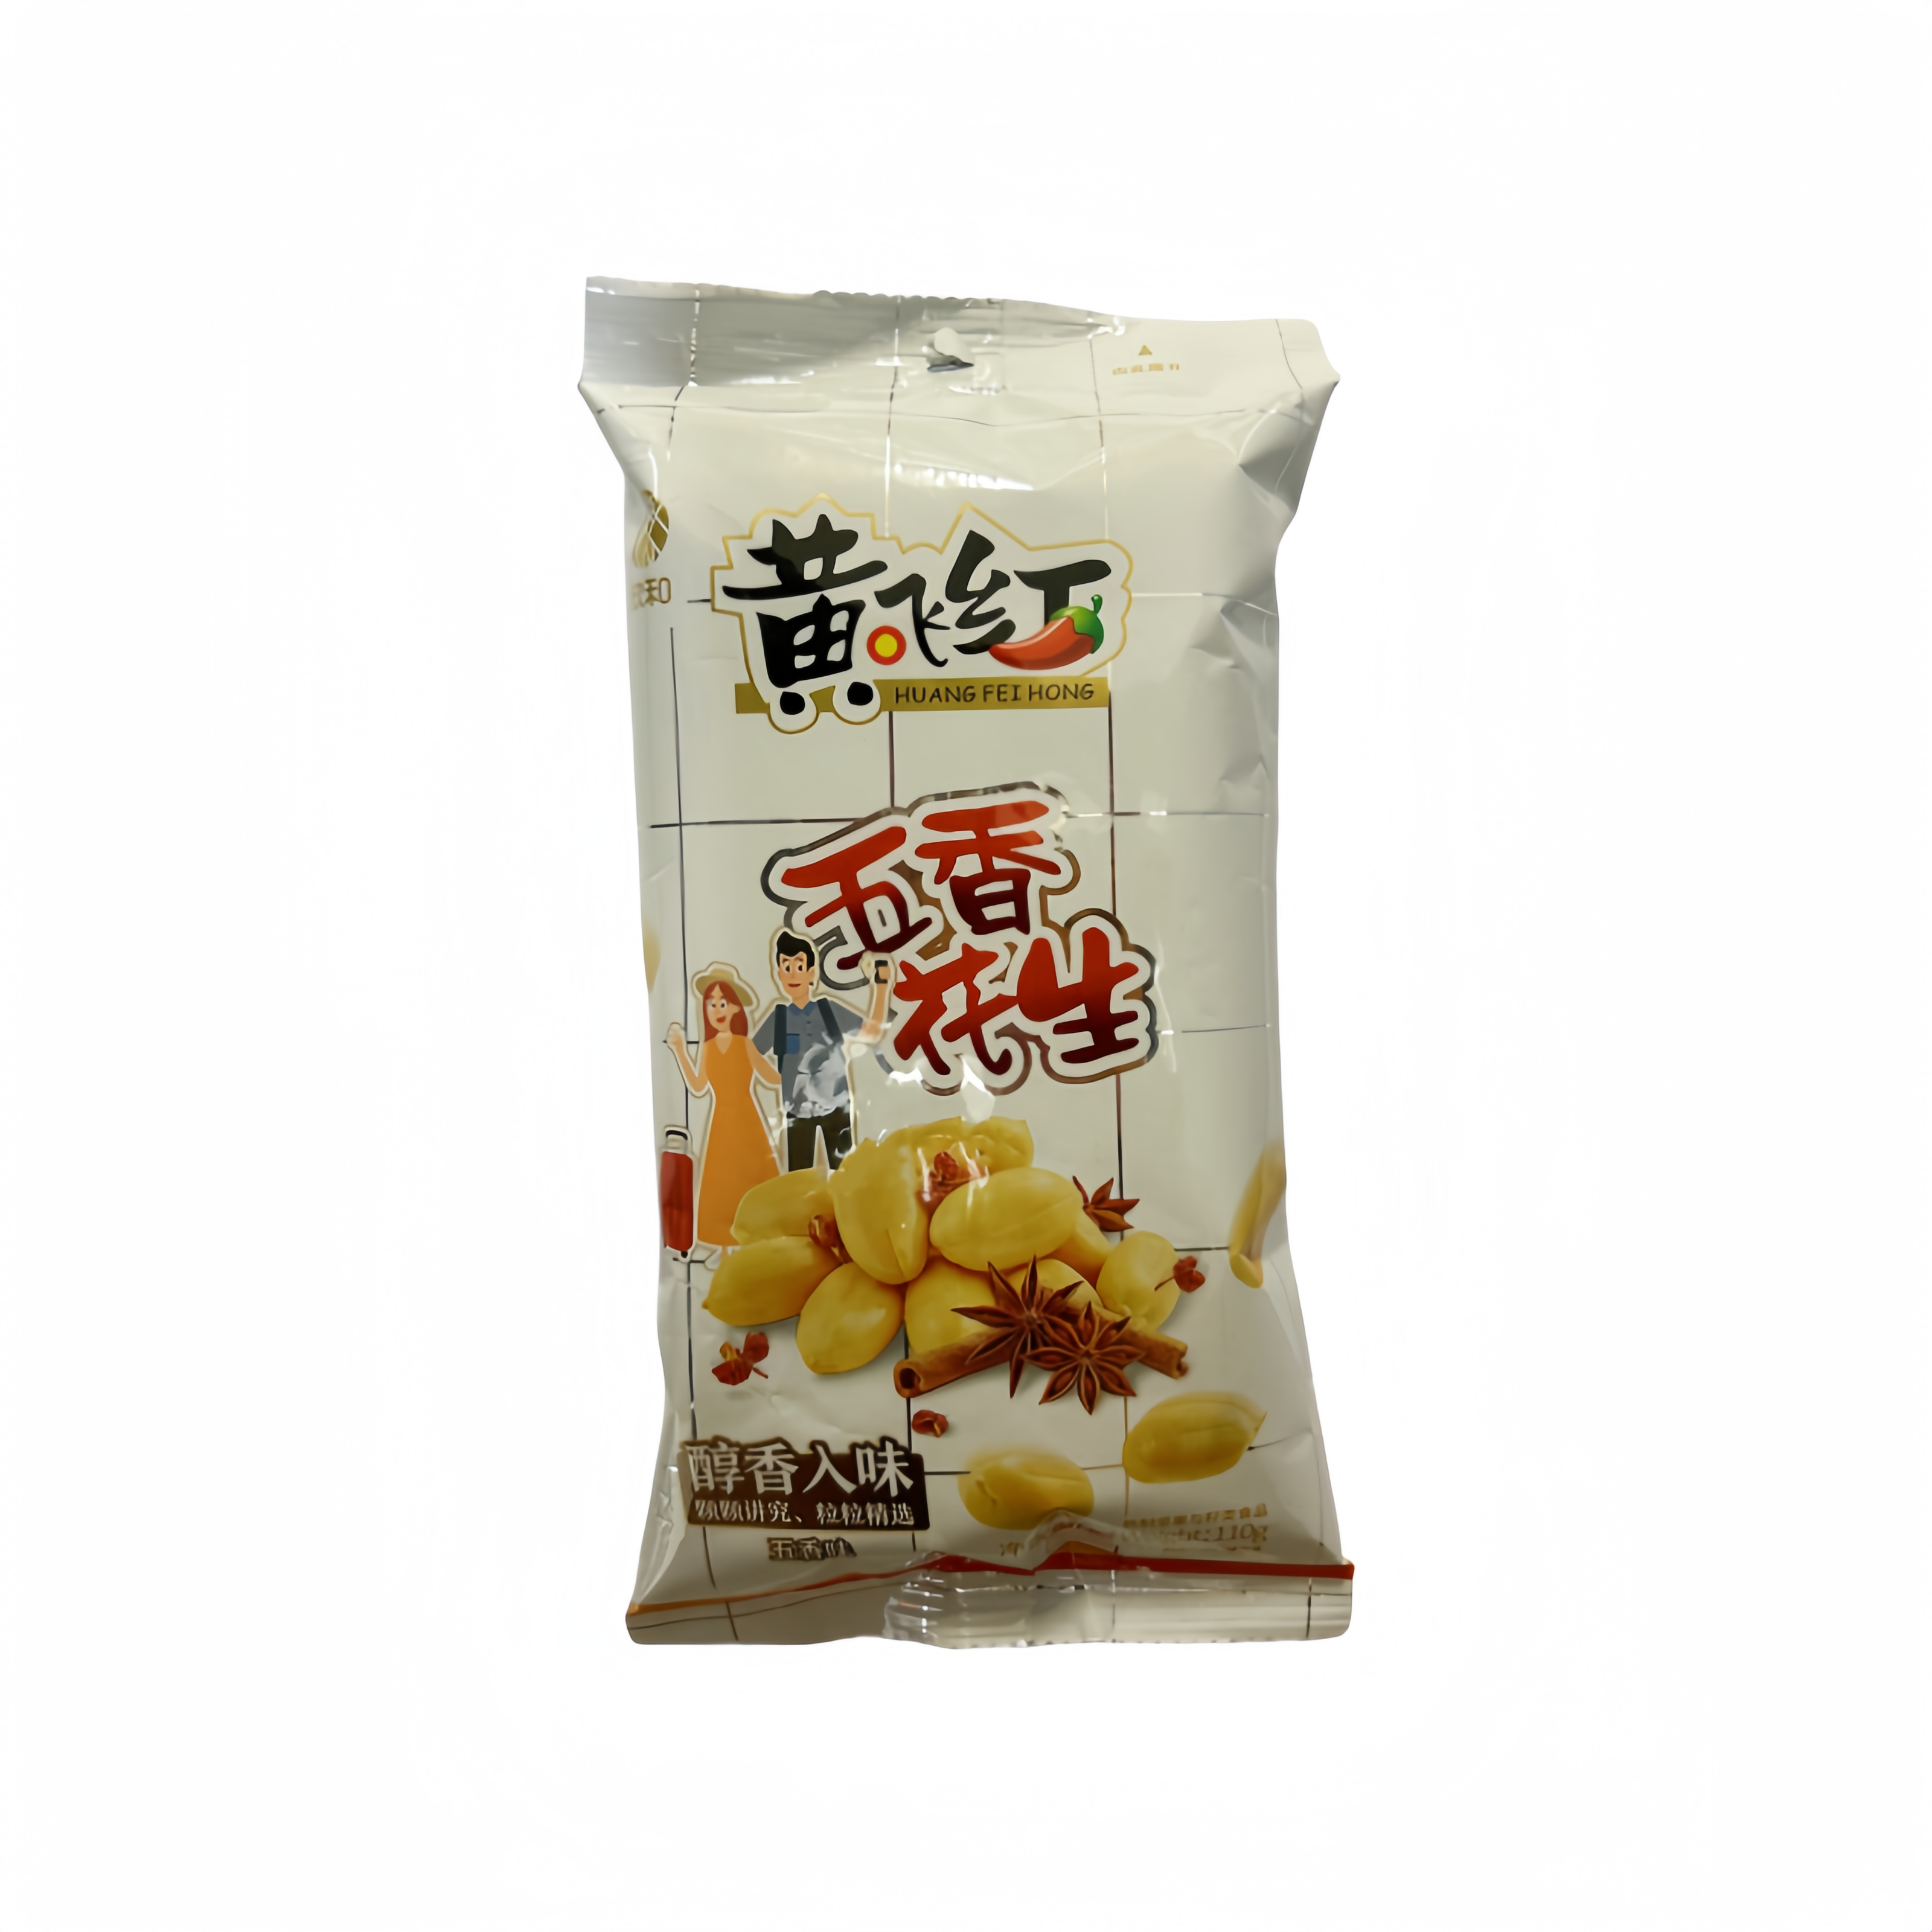 Peanuts With Five Spices Flavor 110g Huang Fei Hong China